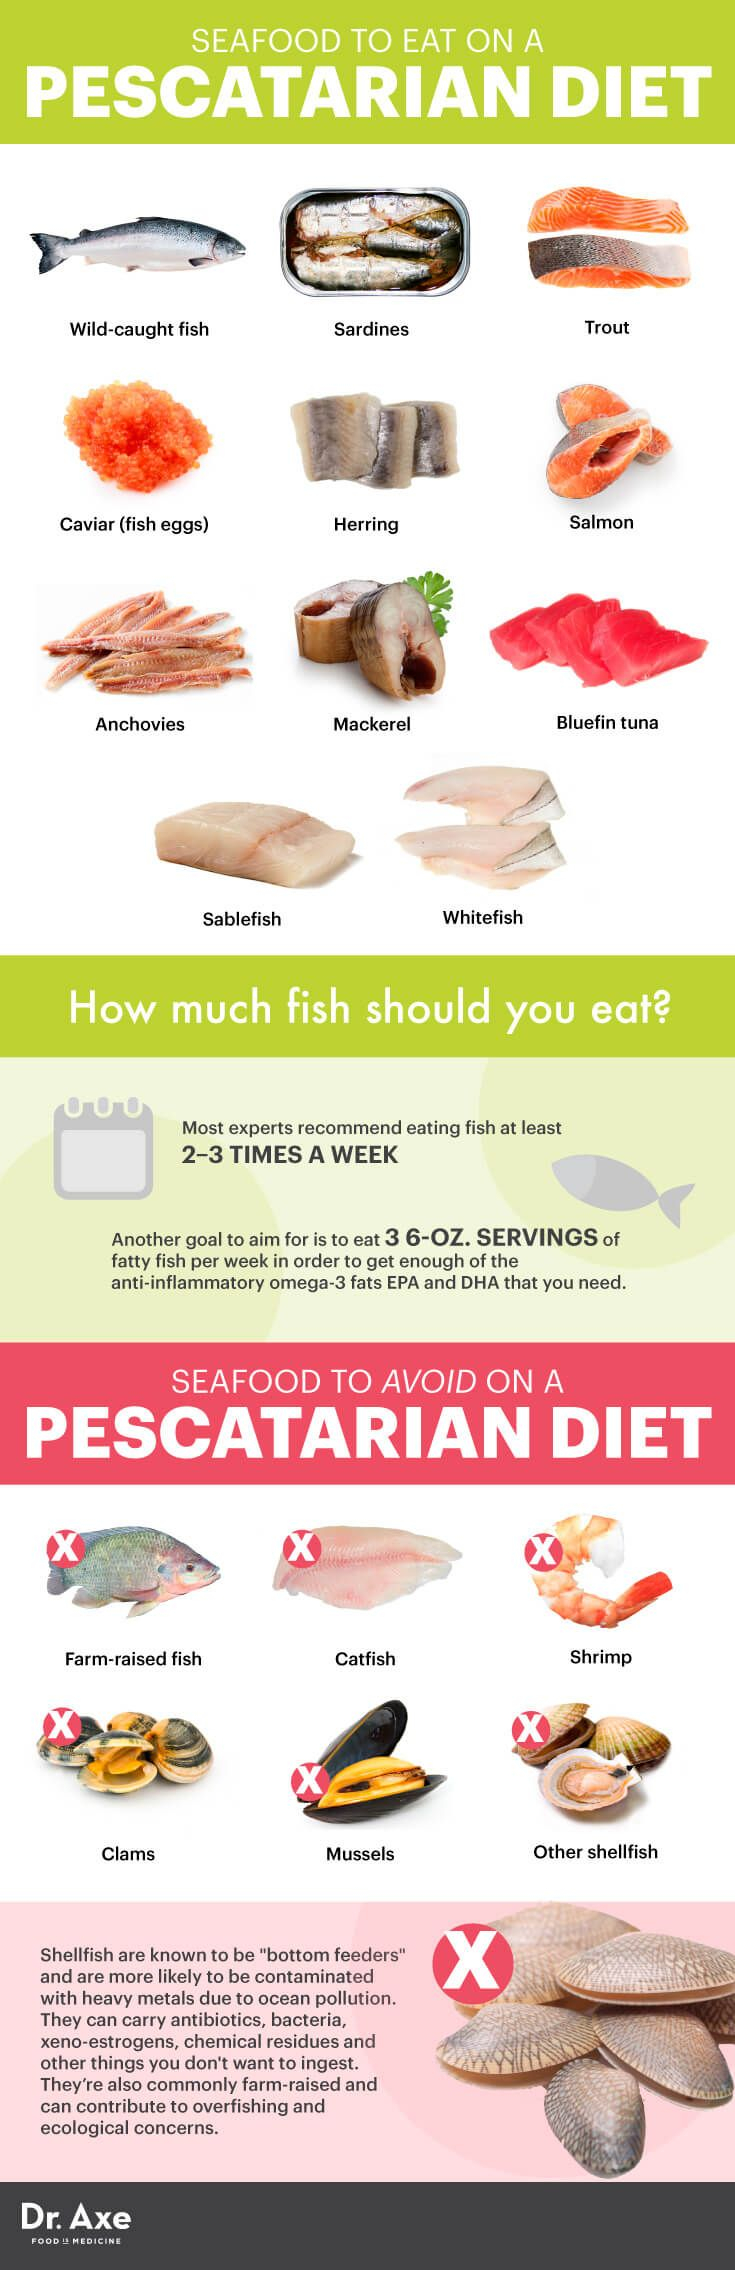 What Is A Pescatarian Diet Pros Cons What To Eat And More Dr Axe 